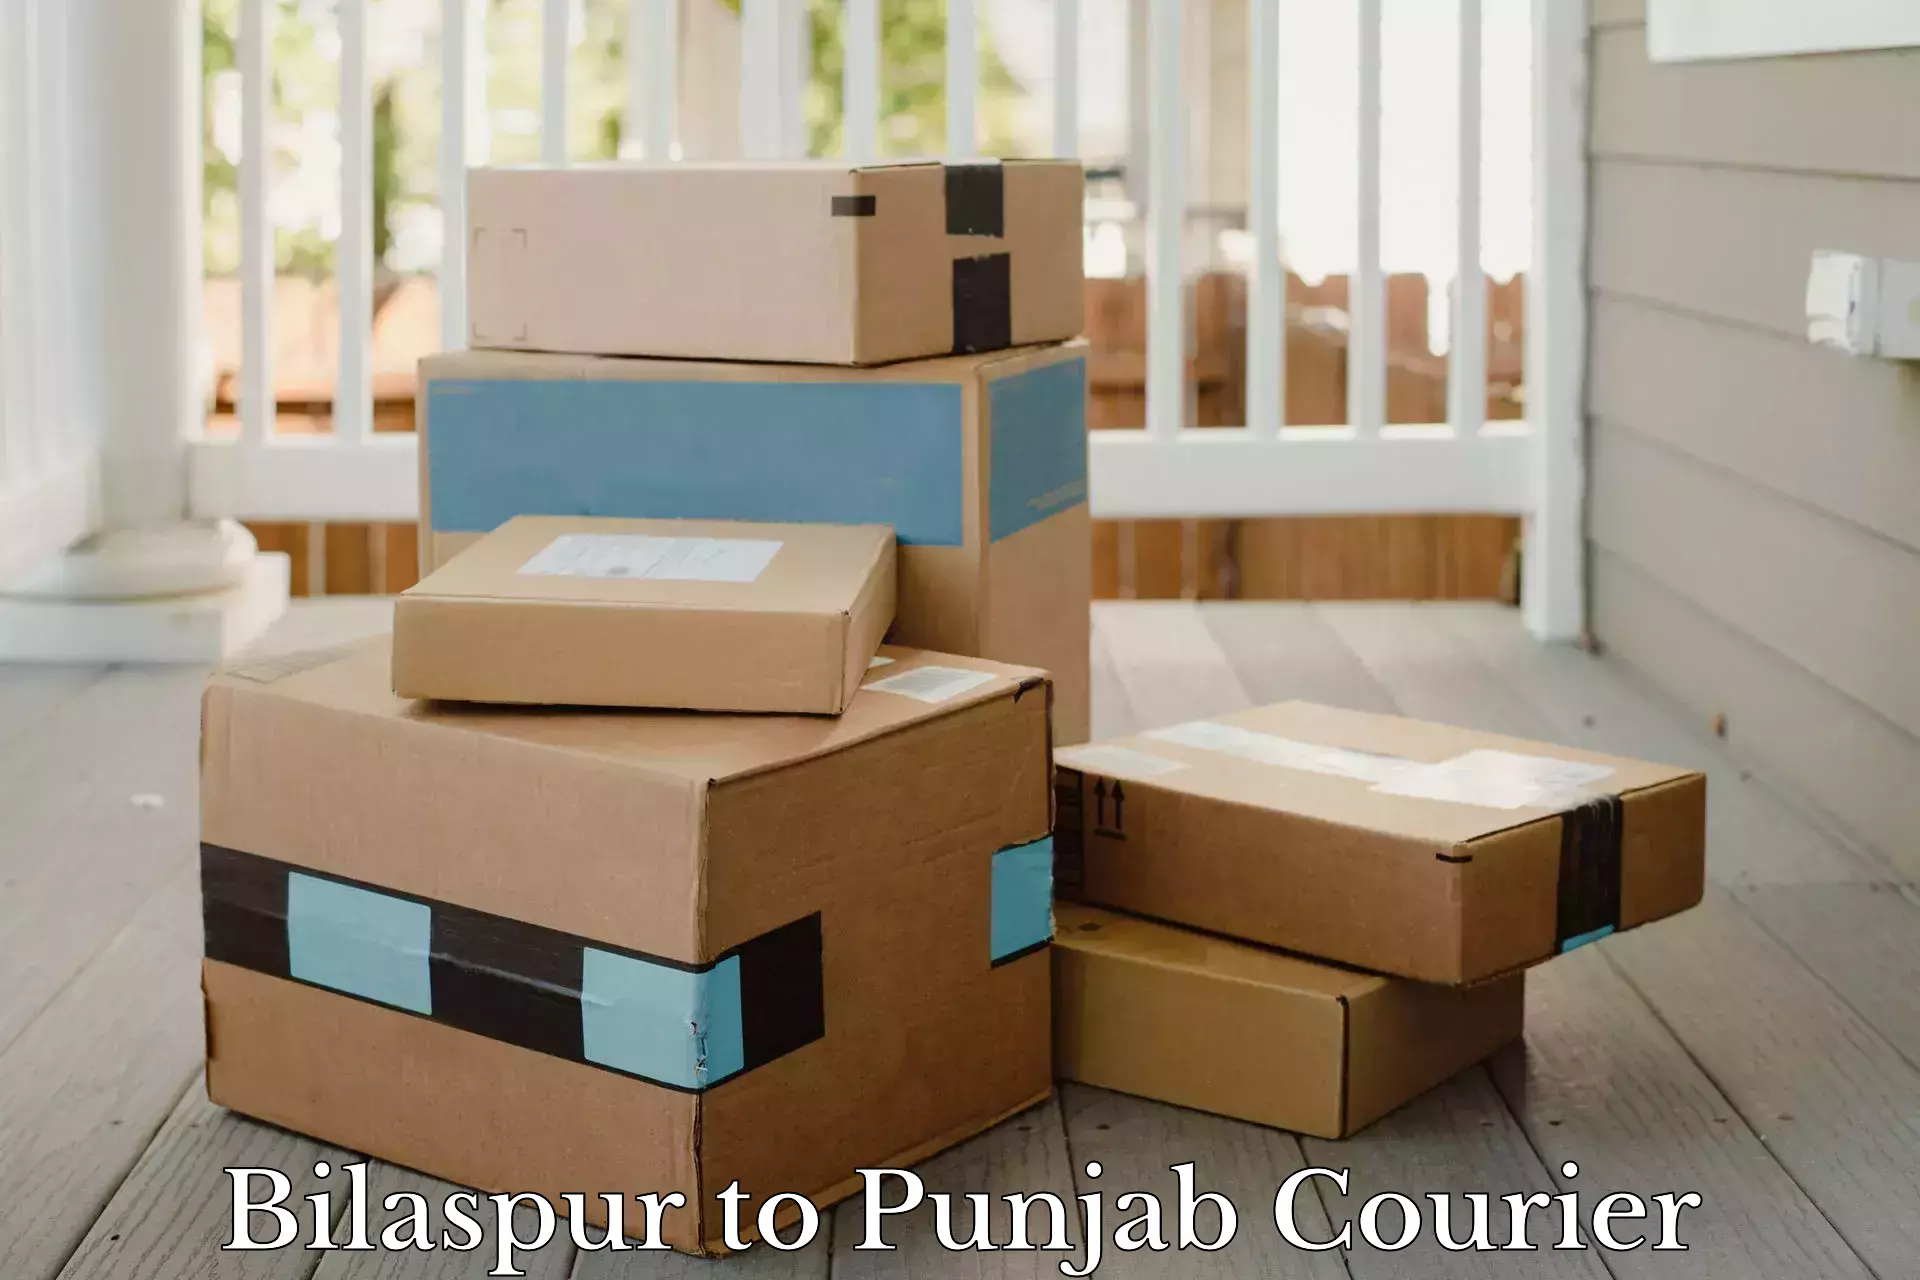 Multi-service courier options Bilaspur to Thapar Institute of Engineering and Technology Patiala